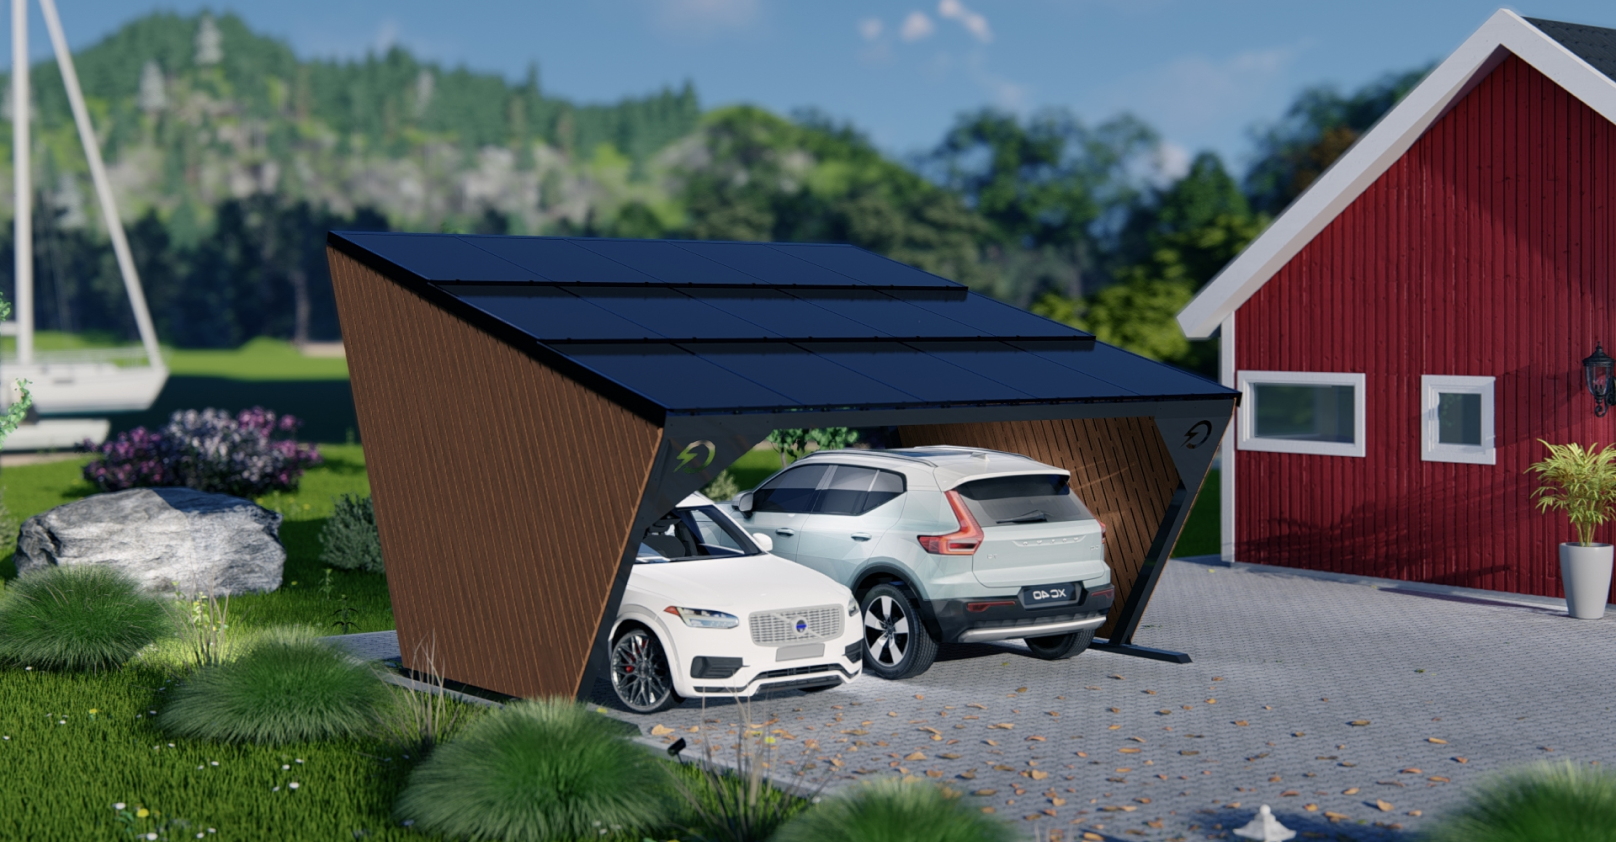 a house and solar carport with 2 cars parked under in daytime